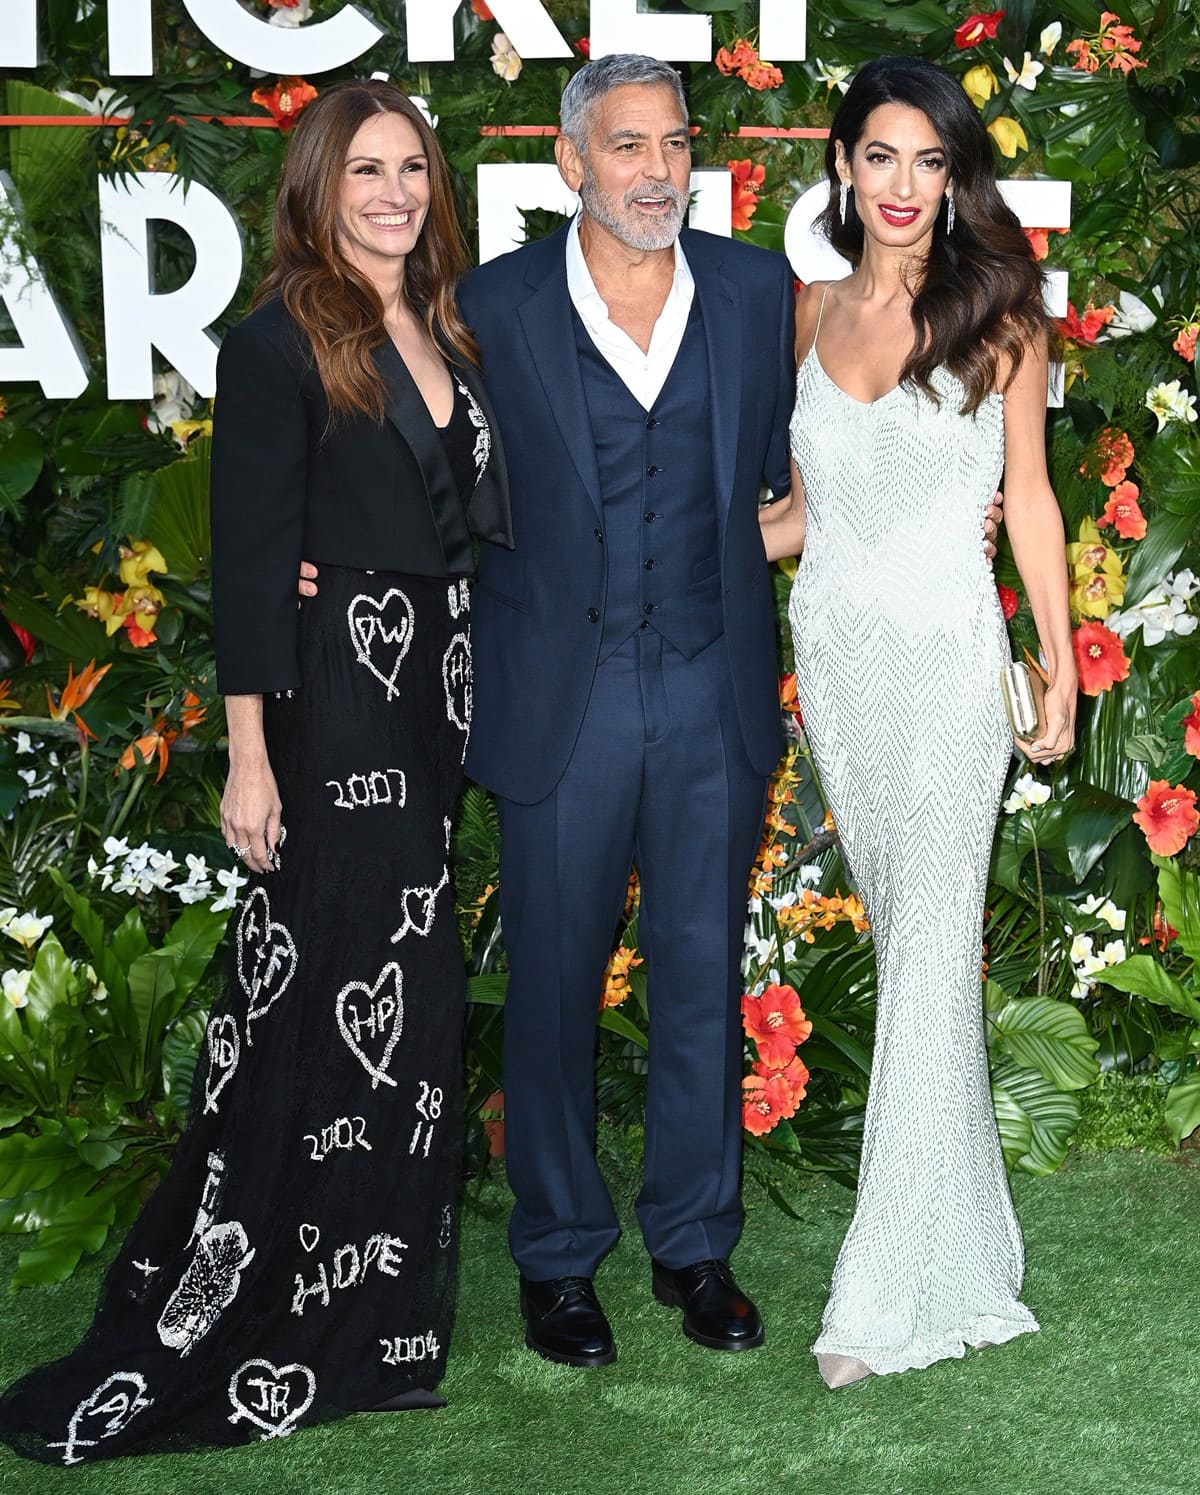 Julia Roberts, Amal Clooney, and George Clooney attend the 